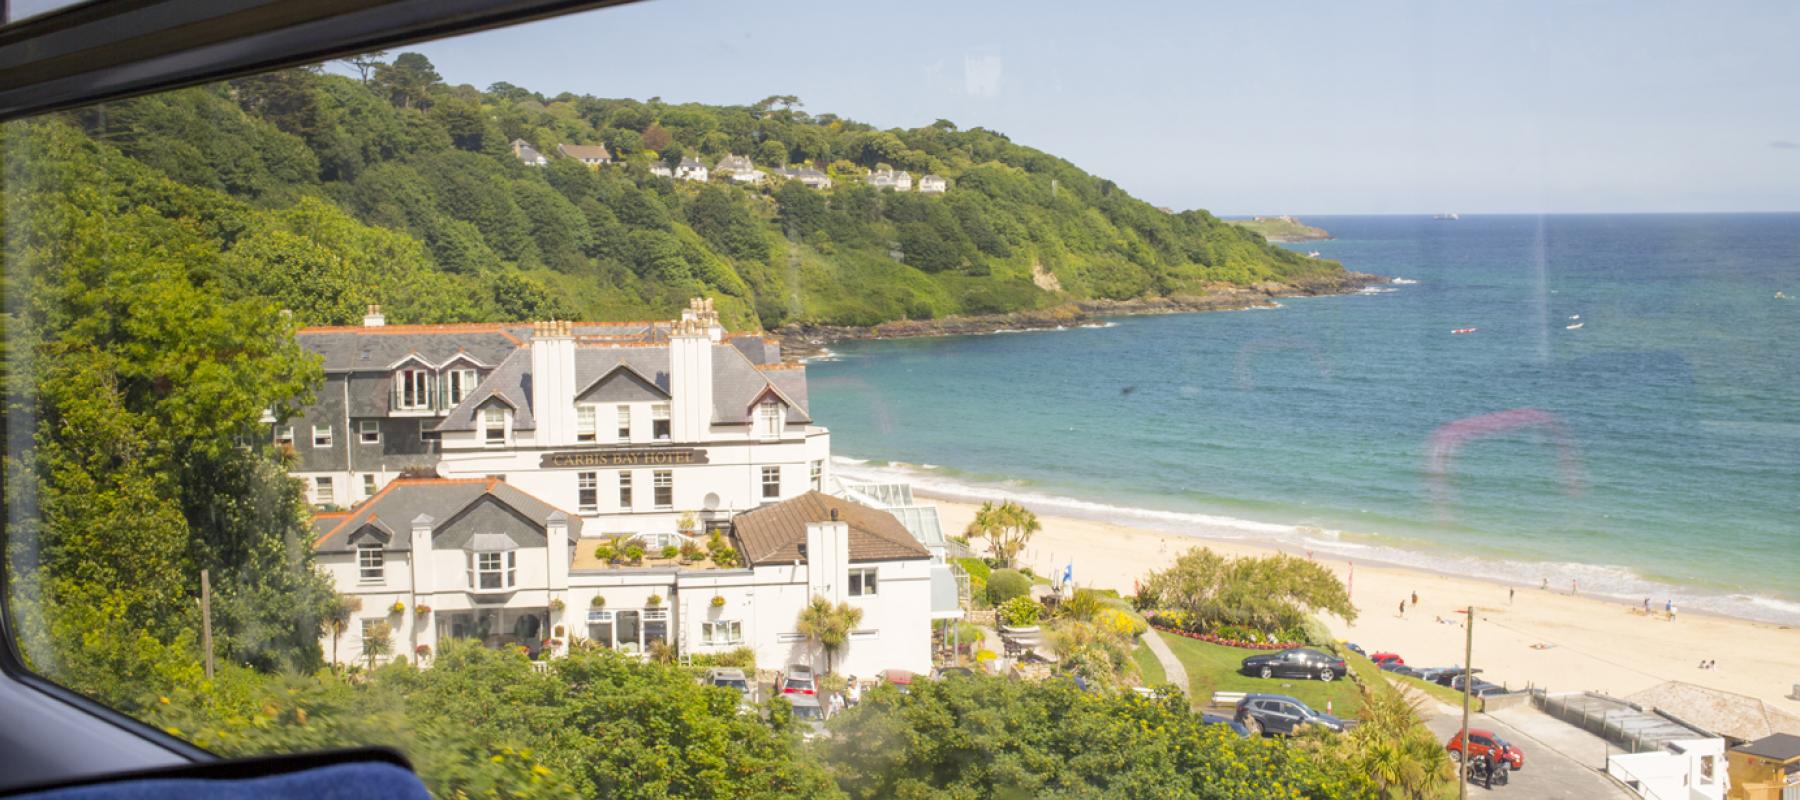 View from the train window on the St Ives Bay Line